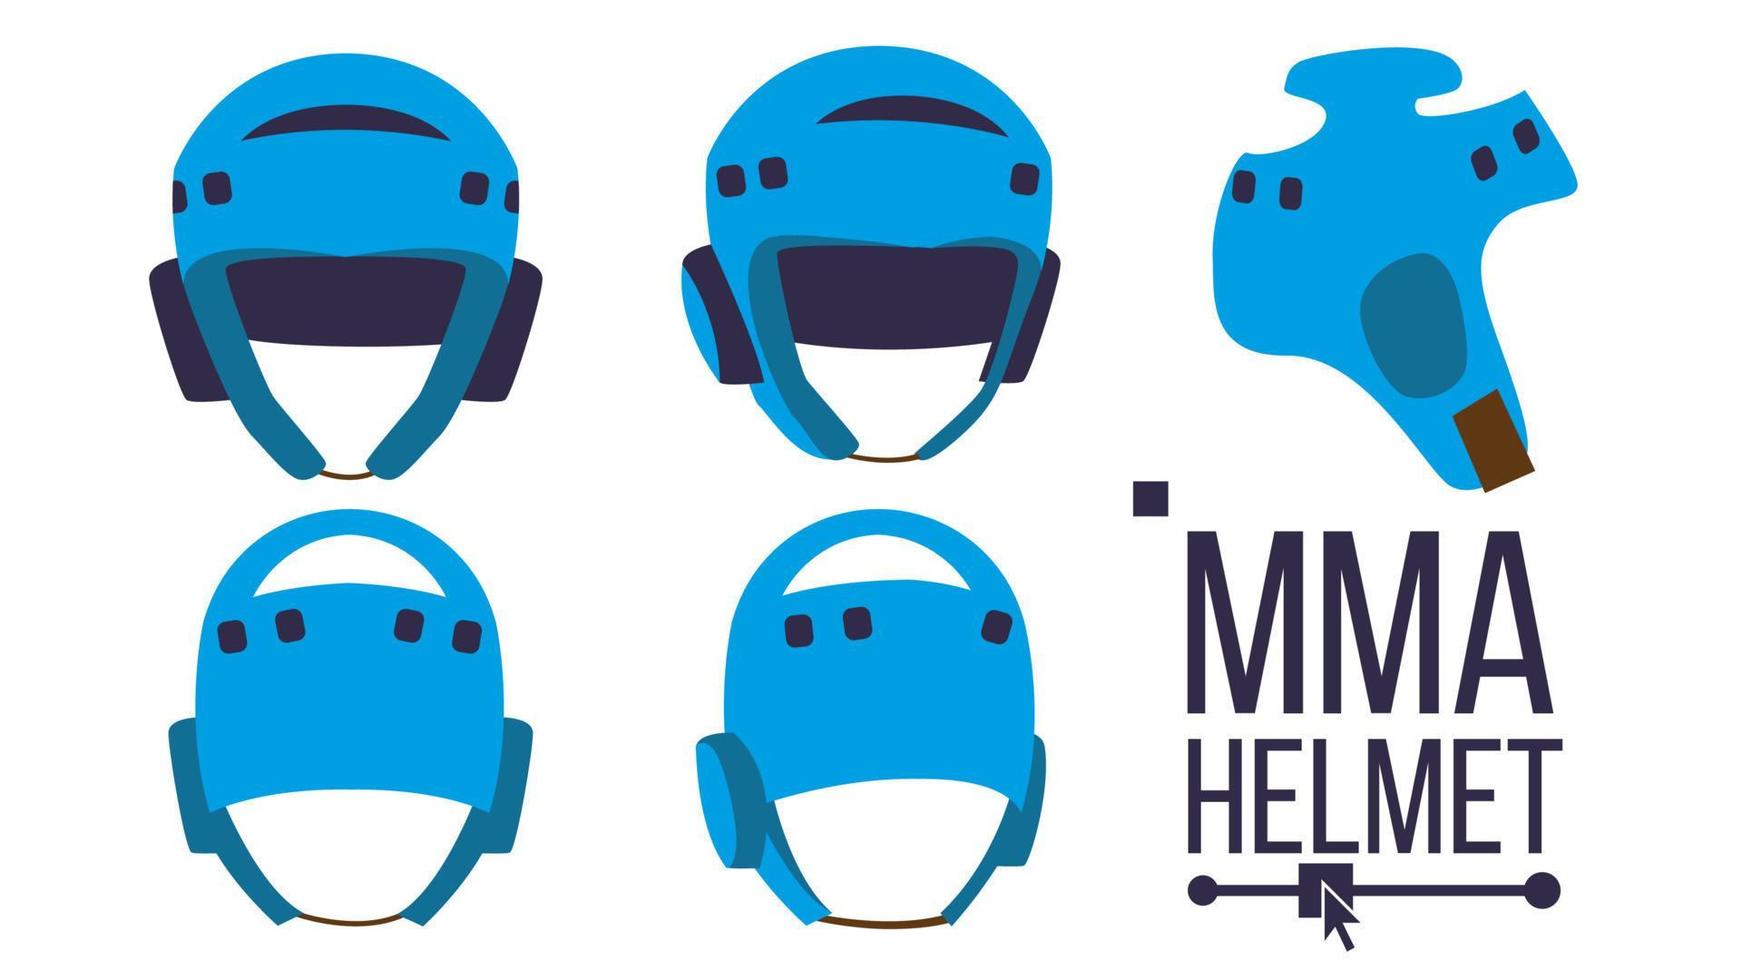 MMA Helmet Vector. Sport Game Equipment Icon. Different View. Boxing Protection Helmet. Isolated Flat Illustration Isolated Flat Illustration vector